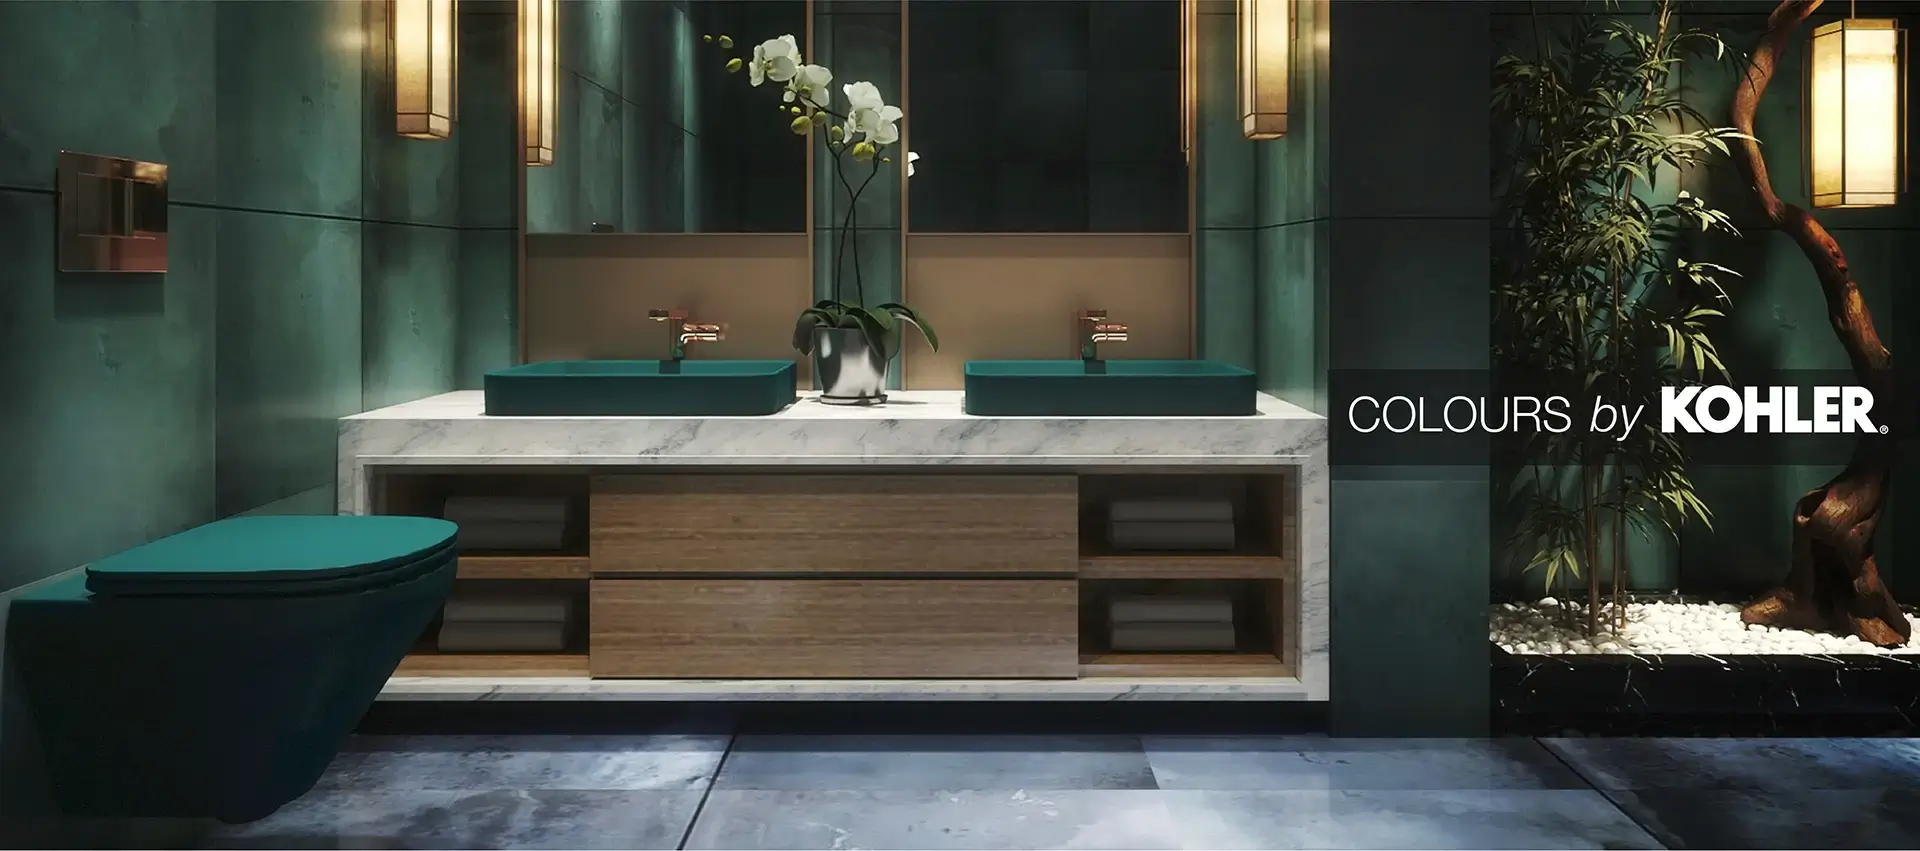 What products does Kohler offer? Colours_by_kohler